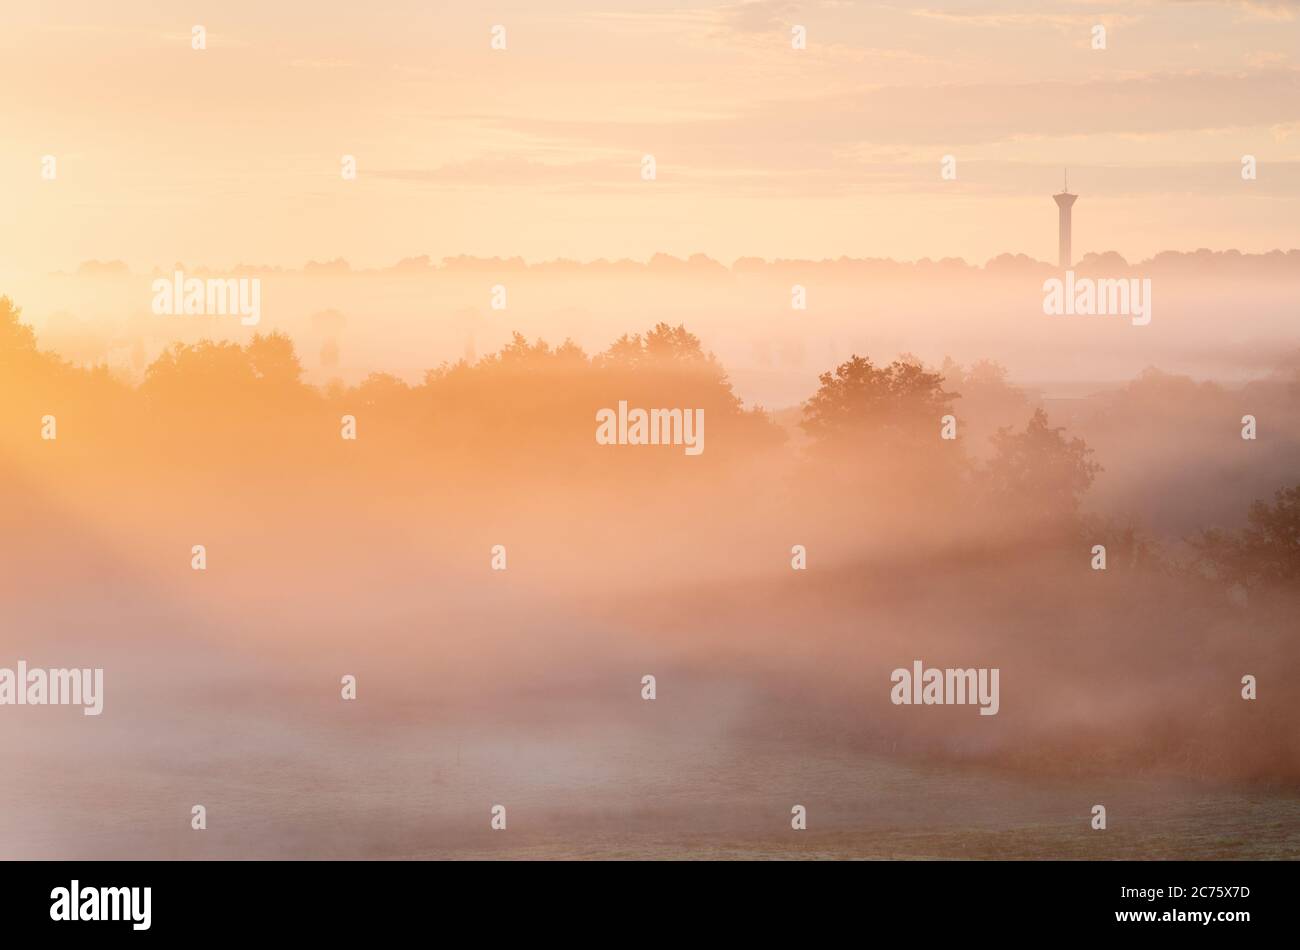 The first direct light from the sun lights up the misty landscape of Poitou Charentes in France, with a traditional water tower visible on the horizon. Stock Photo